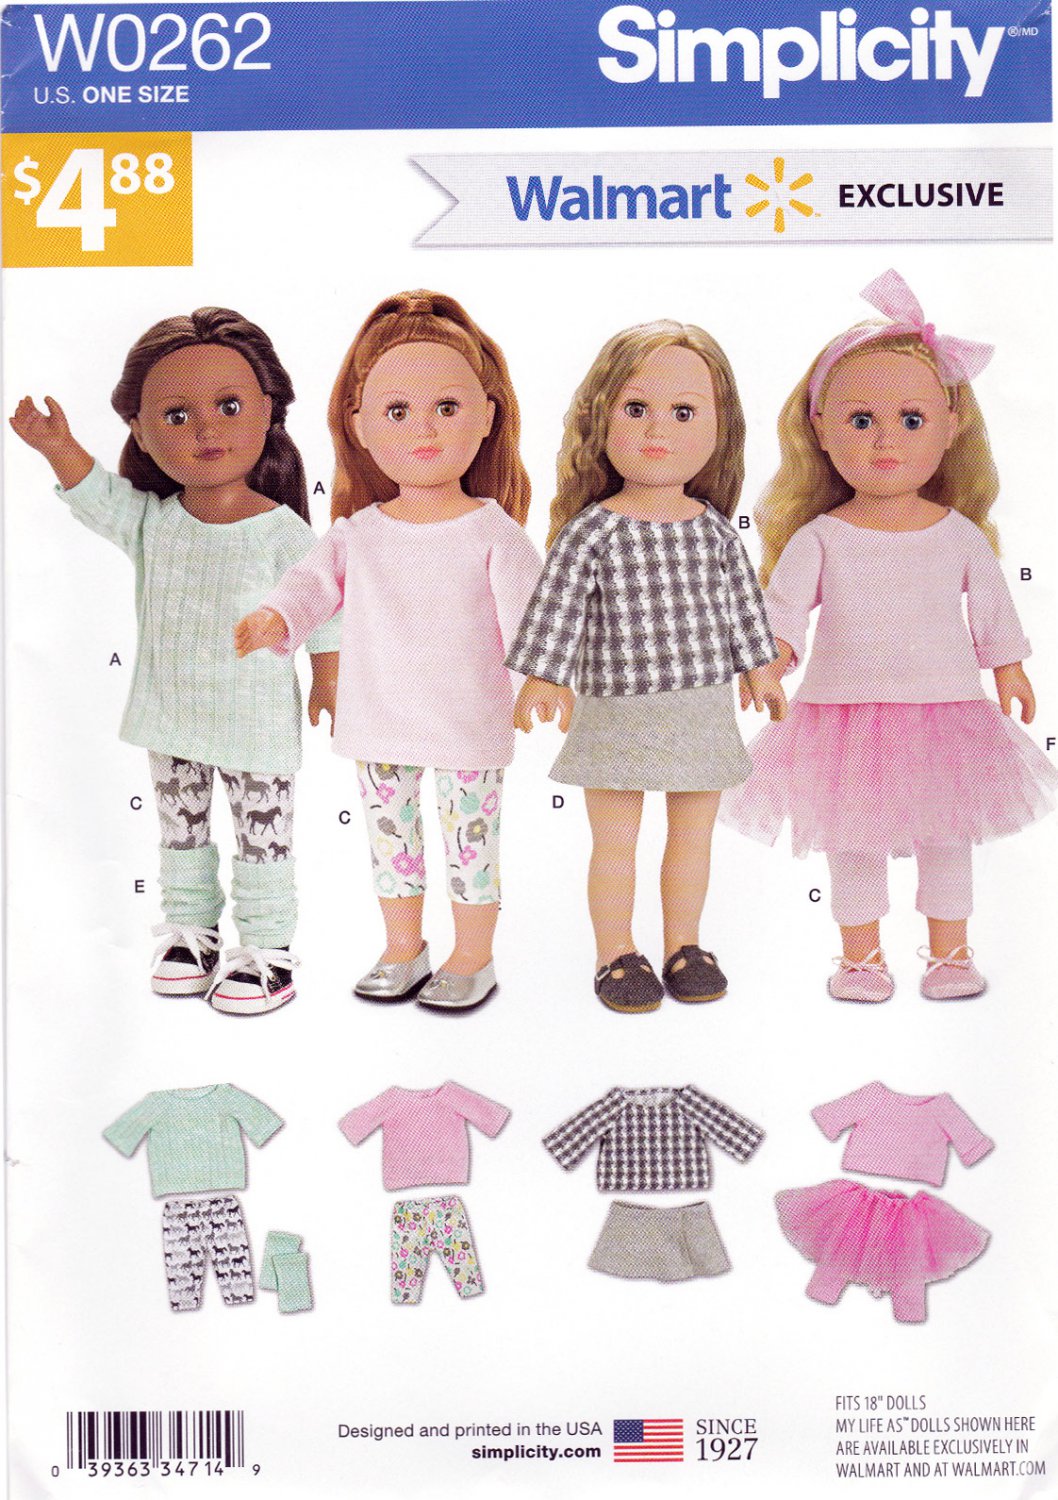 Simplicity W0262 0262 Crafts 18" Doll Clothes Sewing Pattern Leg Warmers Tutu Skirt Top Tunic OSZ